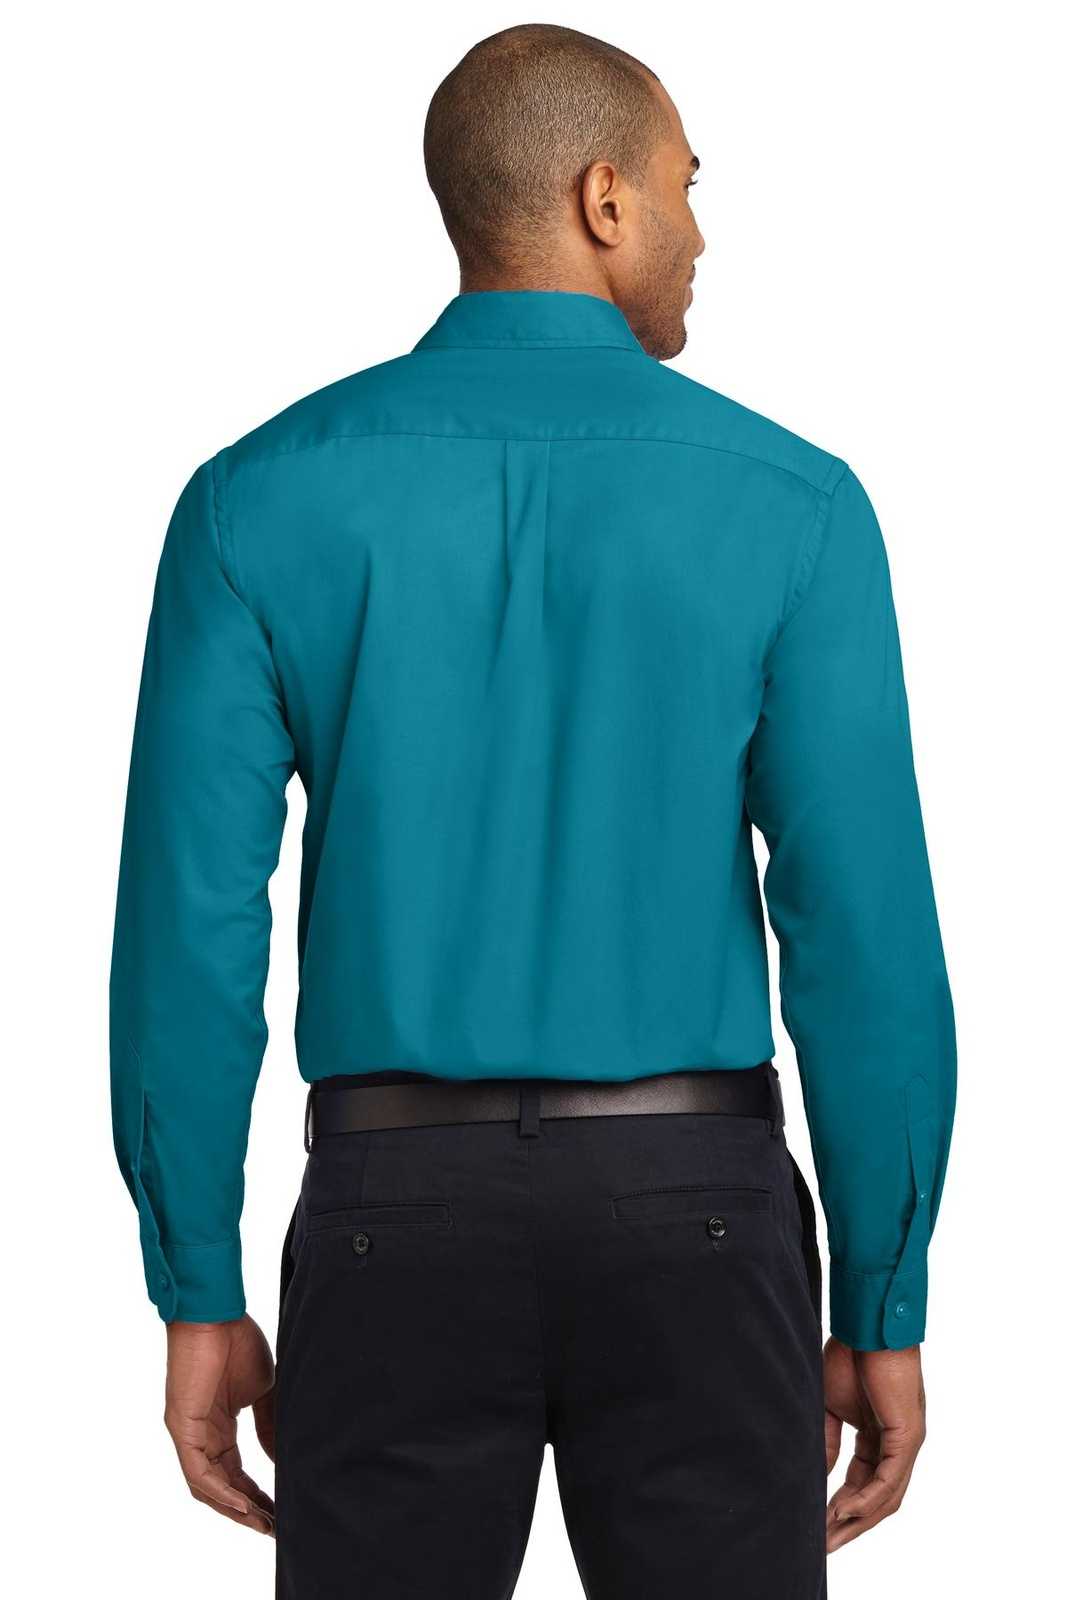 Port Authority TLS608 Tall Long Sleeve Easy Care Shirt - Teal Green - HIT a Double - 1